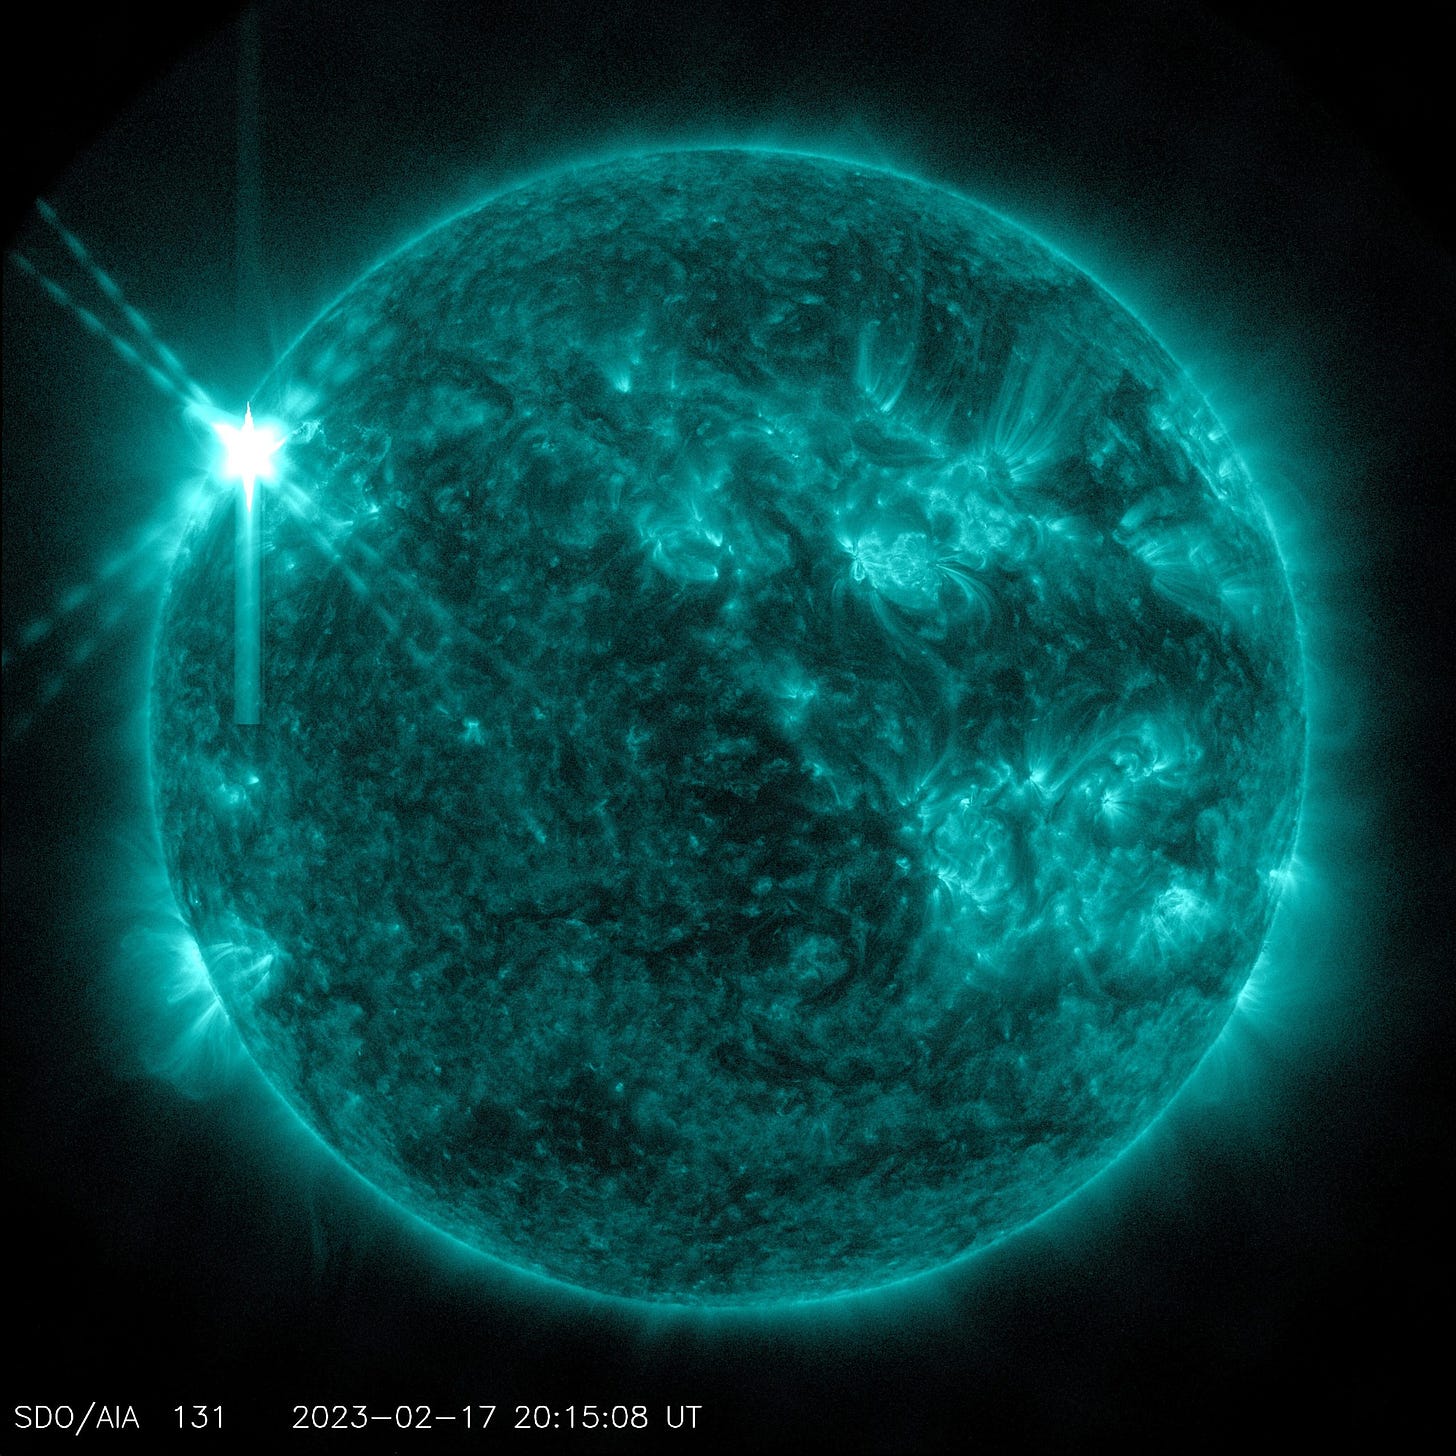 A teal Sun on a black background. The Sun has bright teal areas scattered across the star. On the top left of the star, there is a white X where the flare burst from the Sun.